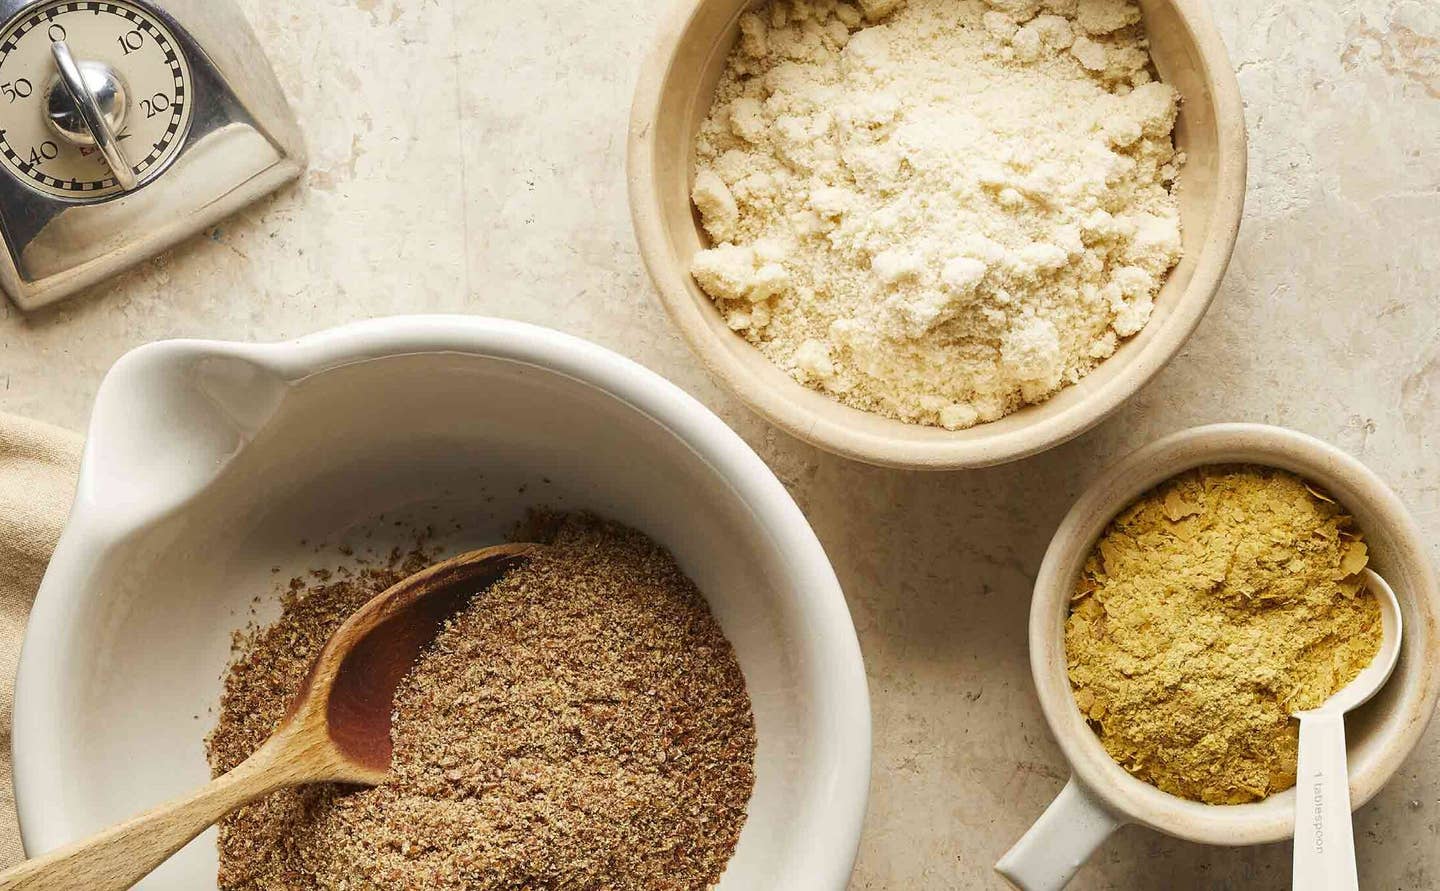 Various ingredients for gluten-free baking, including a bowl of potato starch, ground flaxseeds, and cornmeal or corn flour, with a kitchen timer off to the side